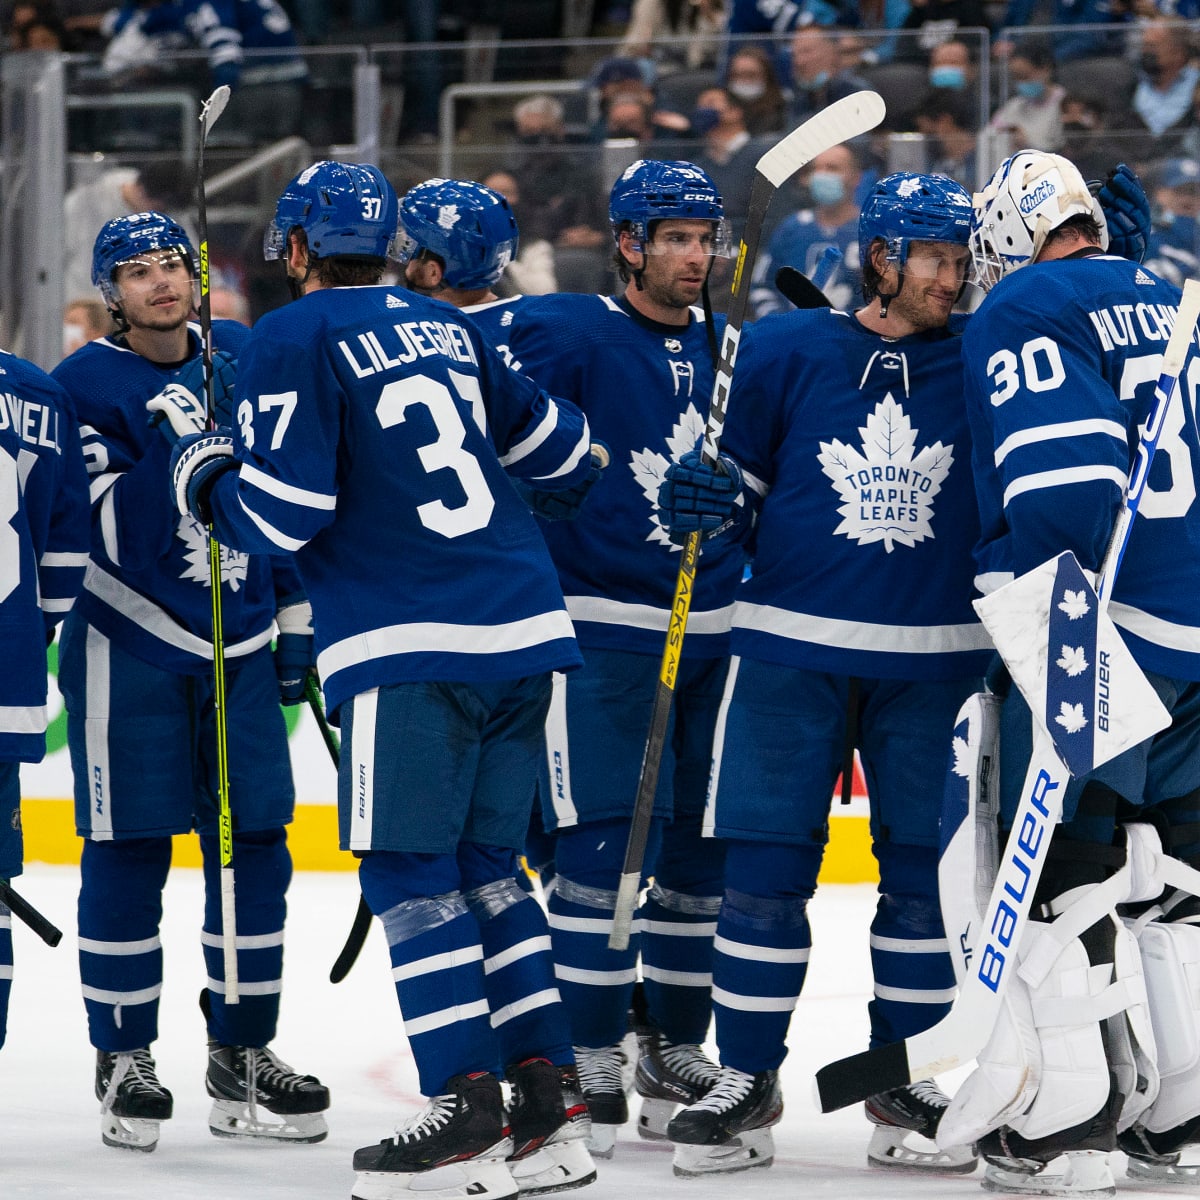 Toronto Maple Leafs at Montreal Canadiens Live Stream Watch Online, TV Channel, Start Time - How to Watch and Stream Major League and College Sports 